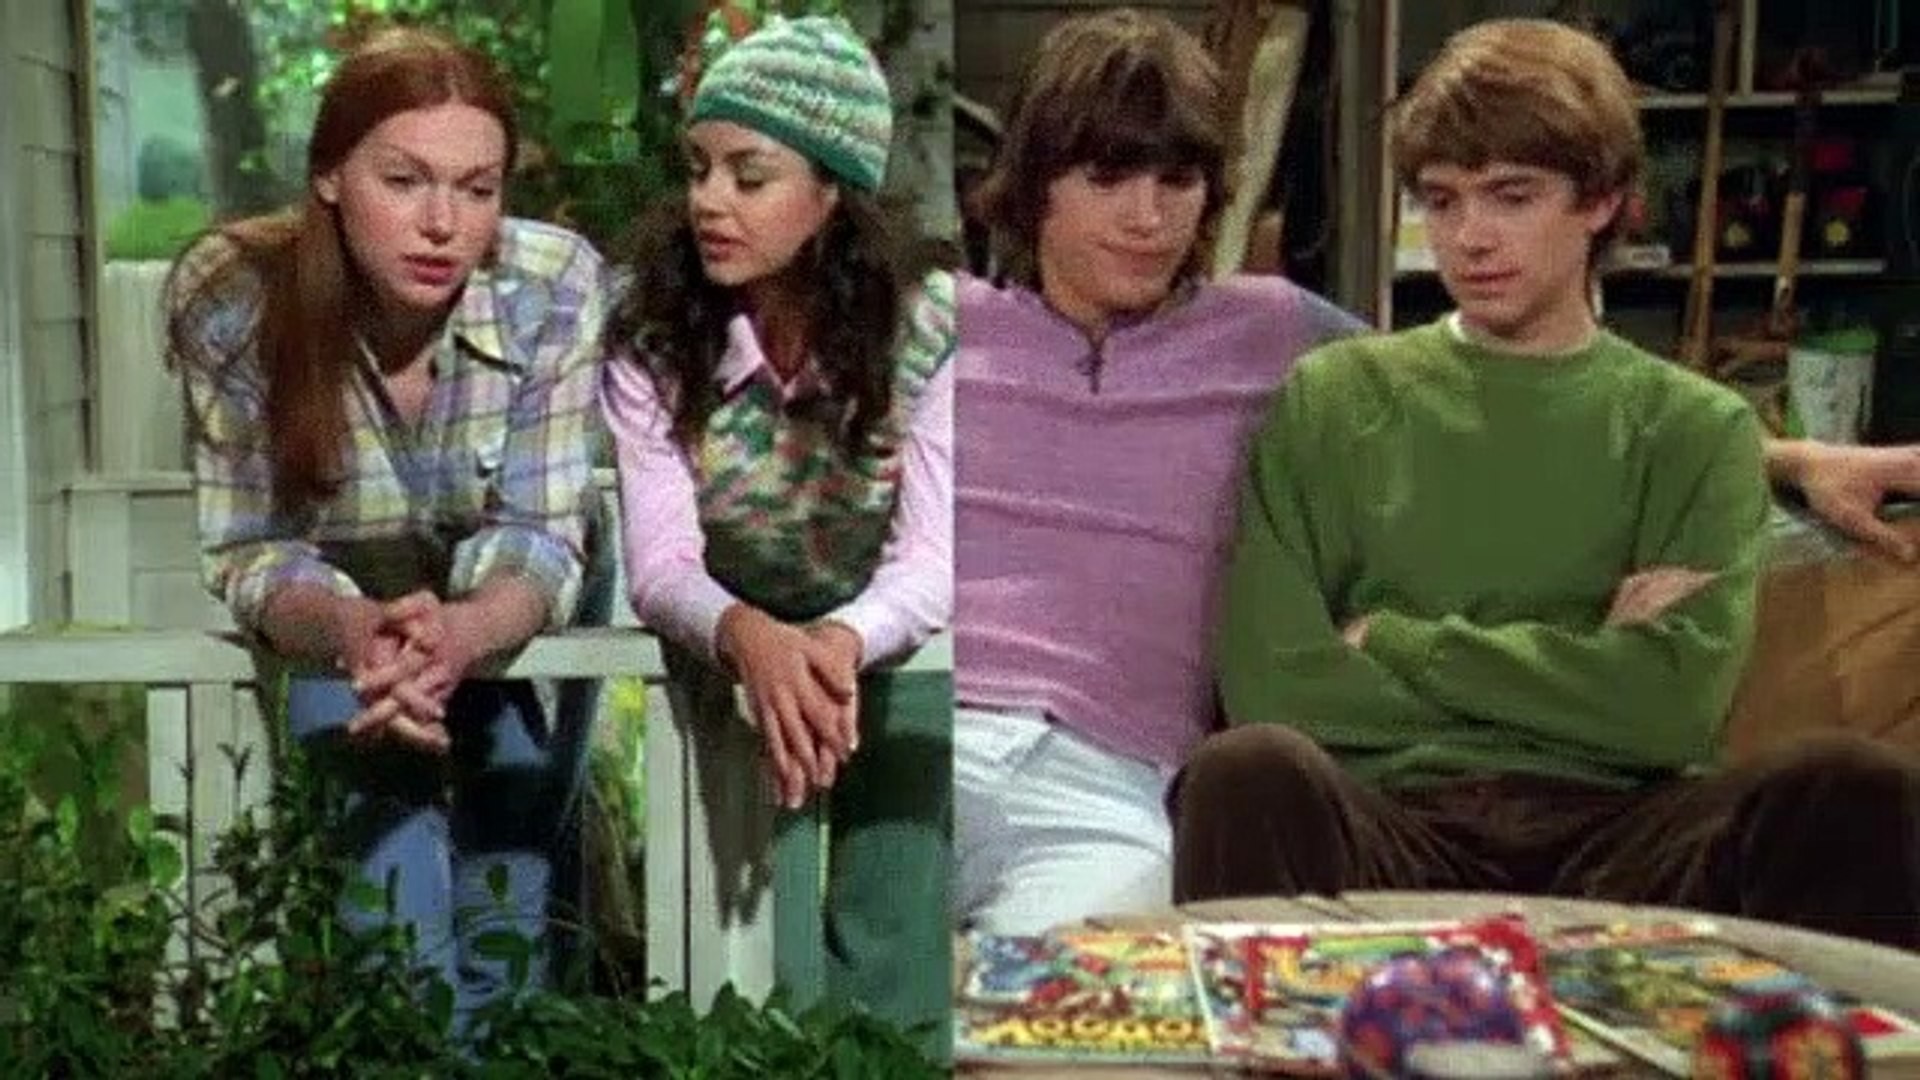 1920x1080 That '70s Show Season 1 Episode 8 - Drive-In